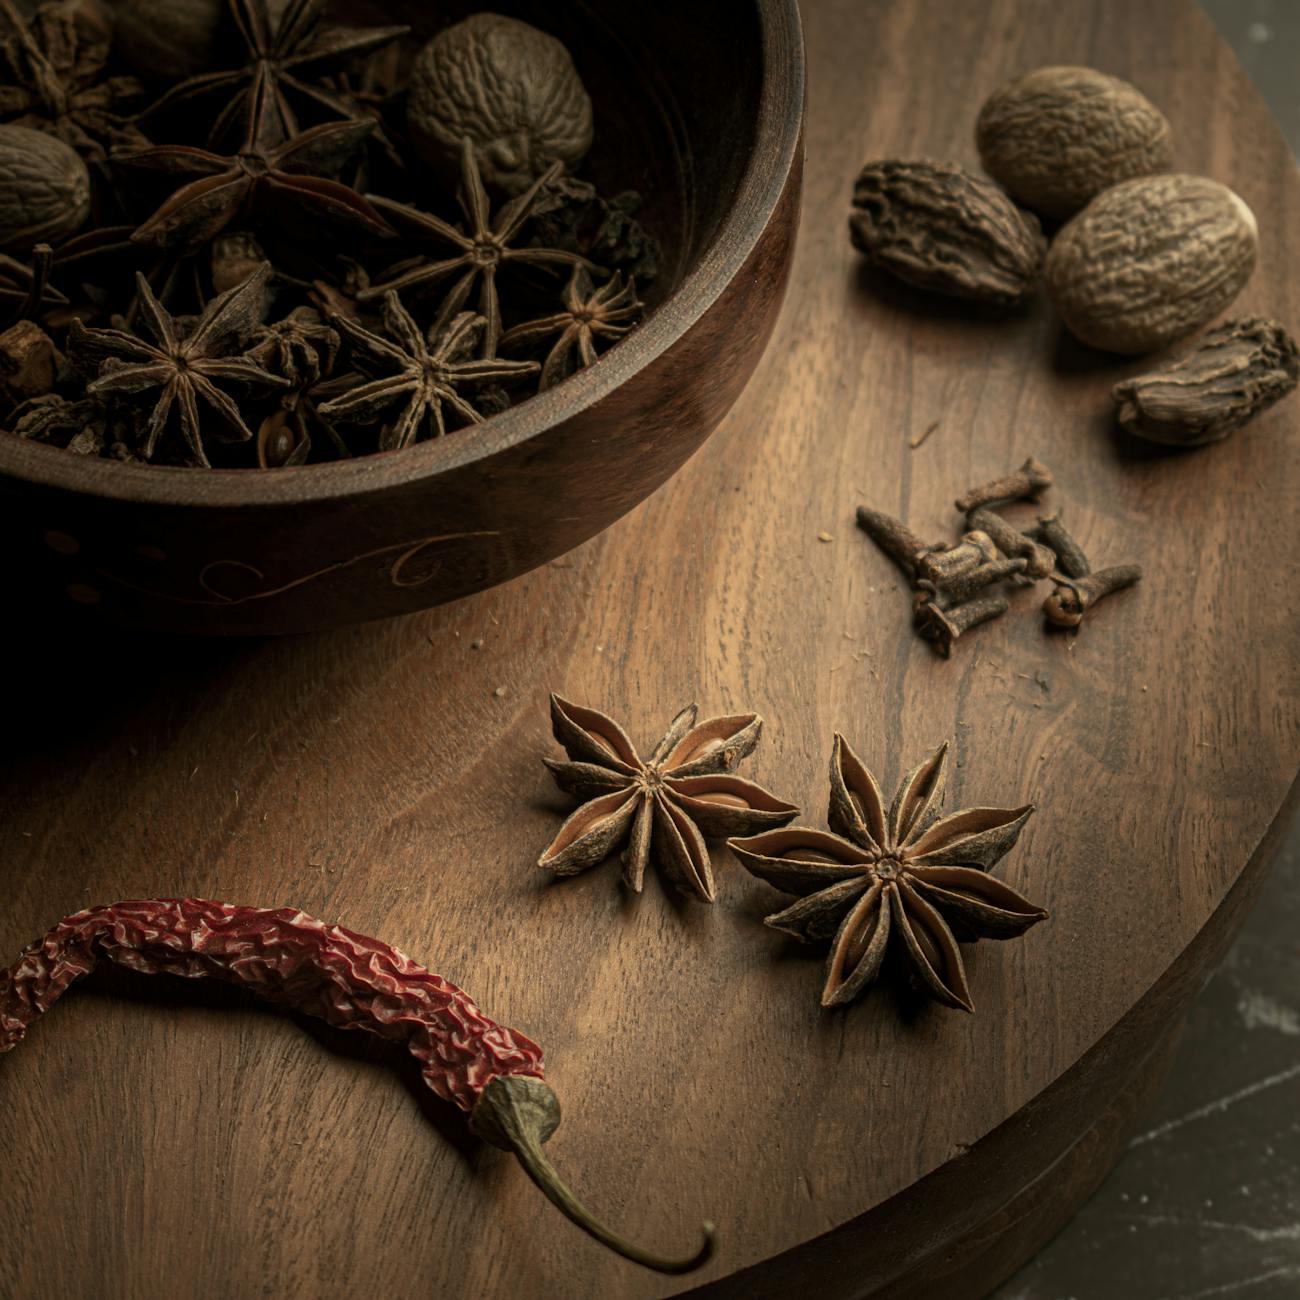 A dried chili pepper, whole star anise, clove buds, and whole nutmegs on a wooden table. 